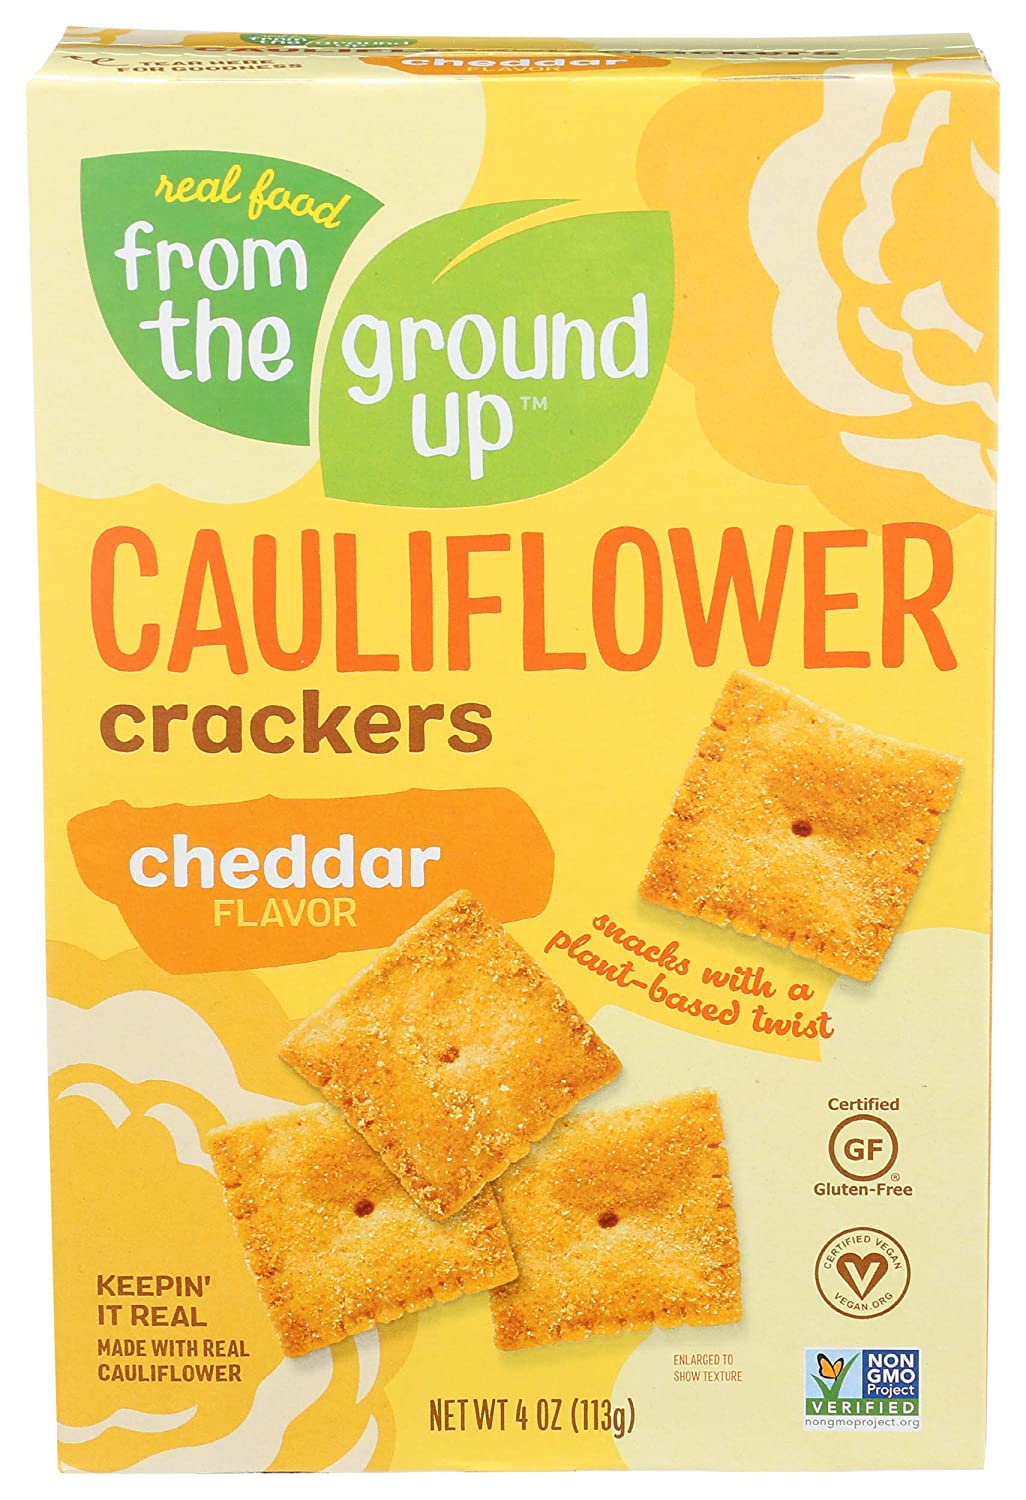 From the Ground Up - Cauliflower Crackers Cheddar